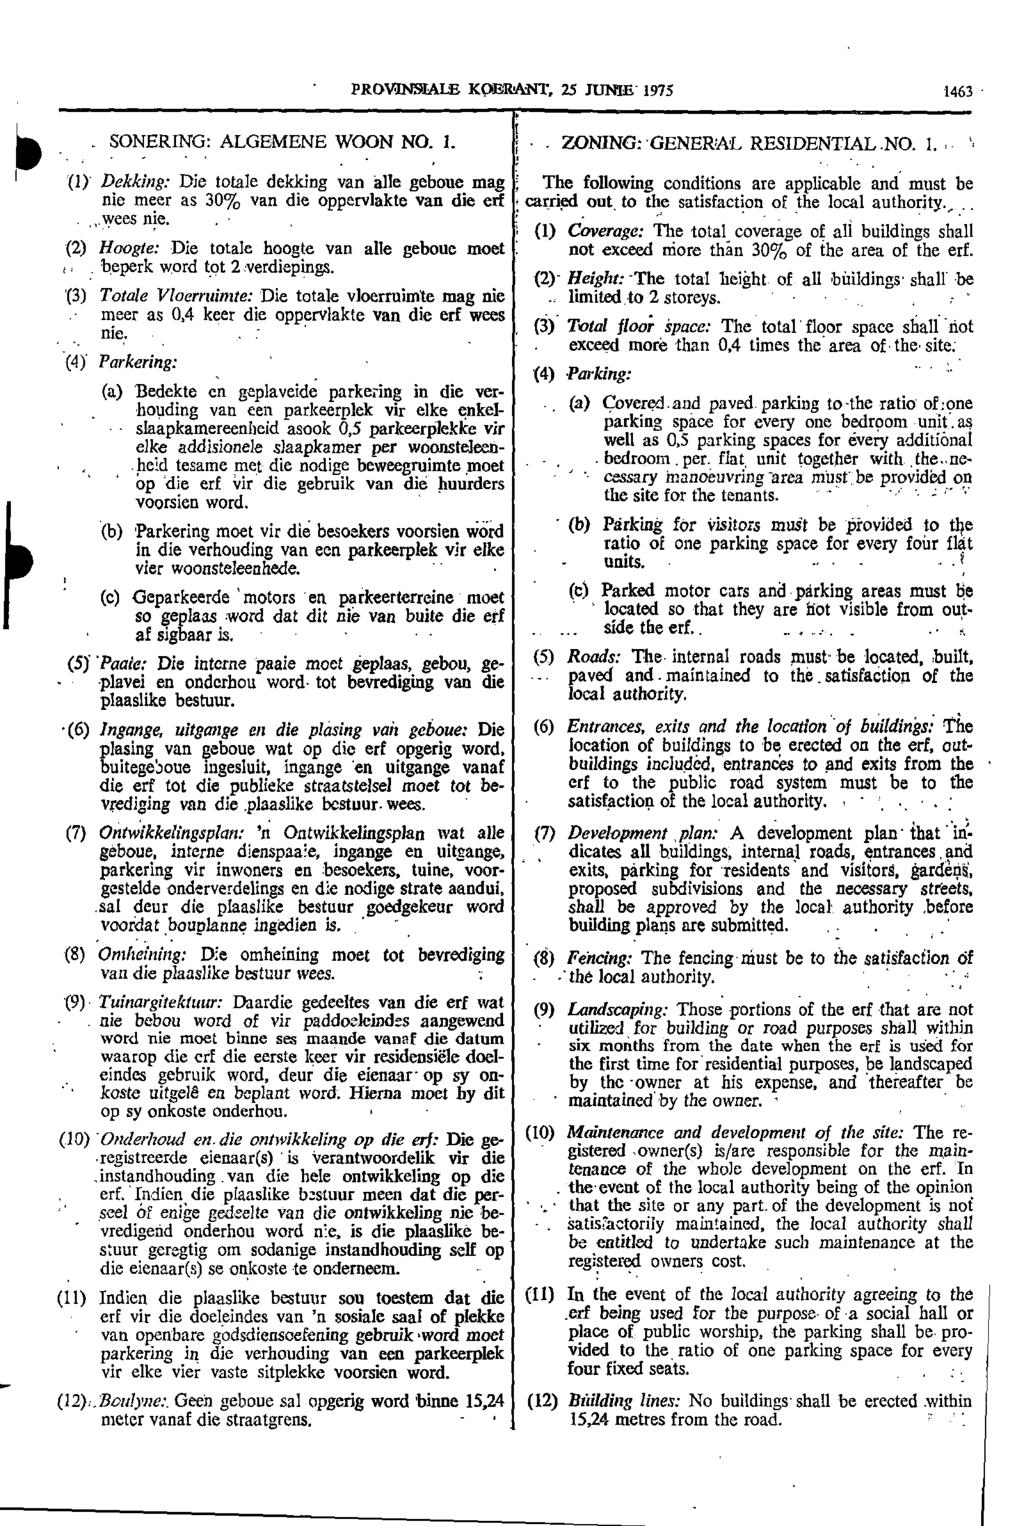 PROVINNIALE KC/BRANT 25 JUNE 975 463 a I SONERING: ALGEMENE WOON NO ZONING: GENERAL RESIDENTIAL NO I (I) Dekking: Die totale dekking van alle geboue mag The following conditions are applicable and